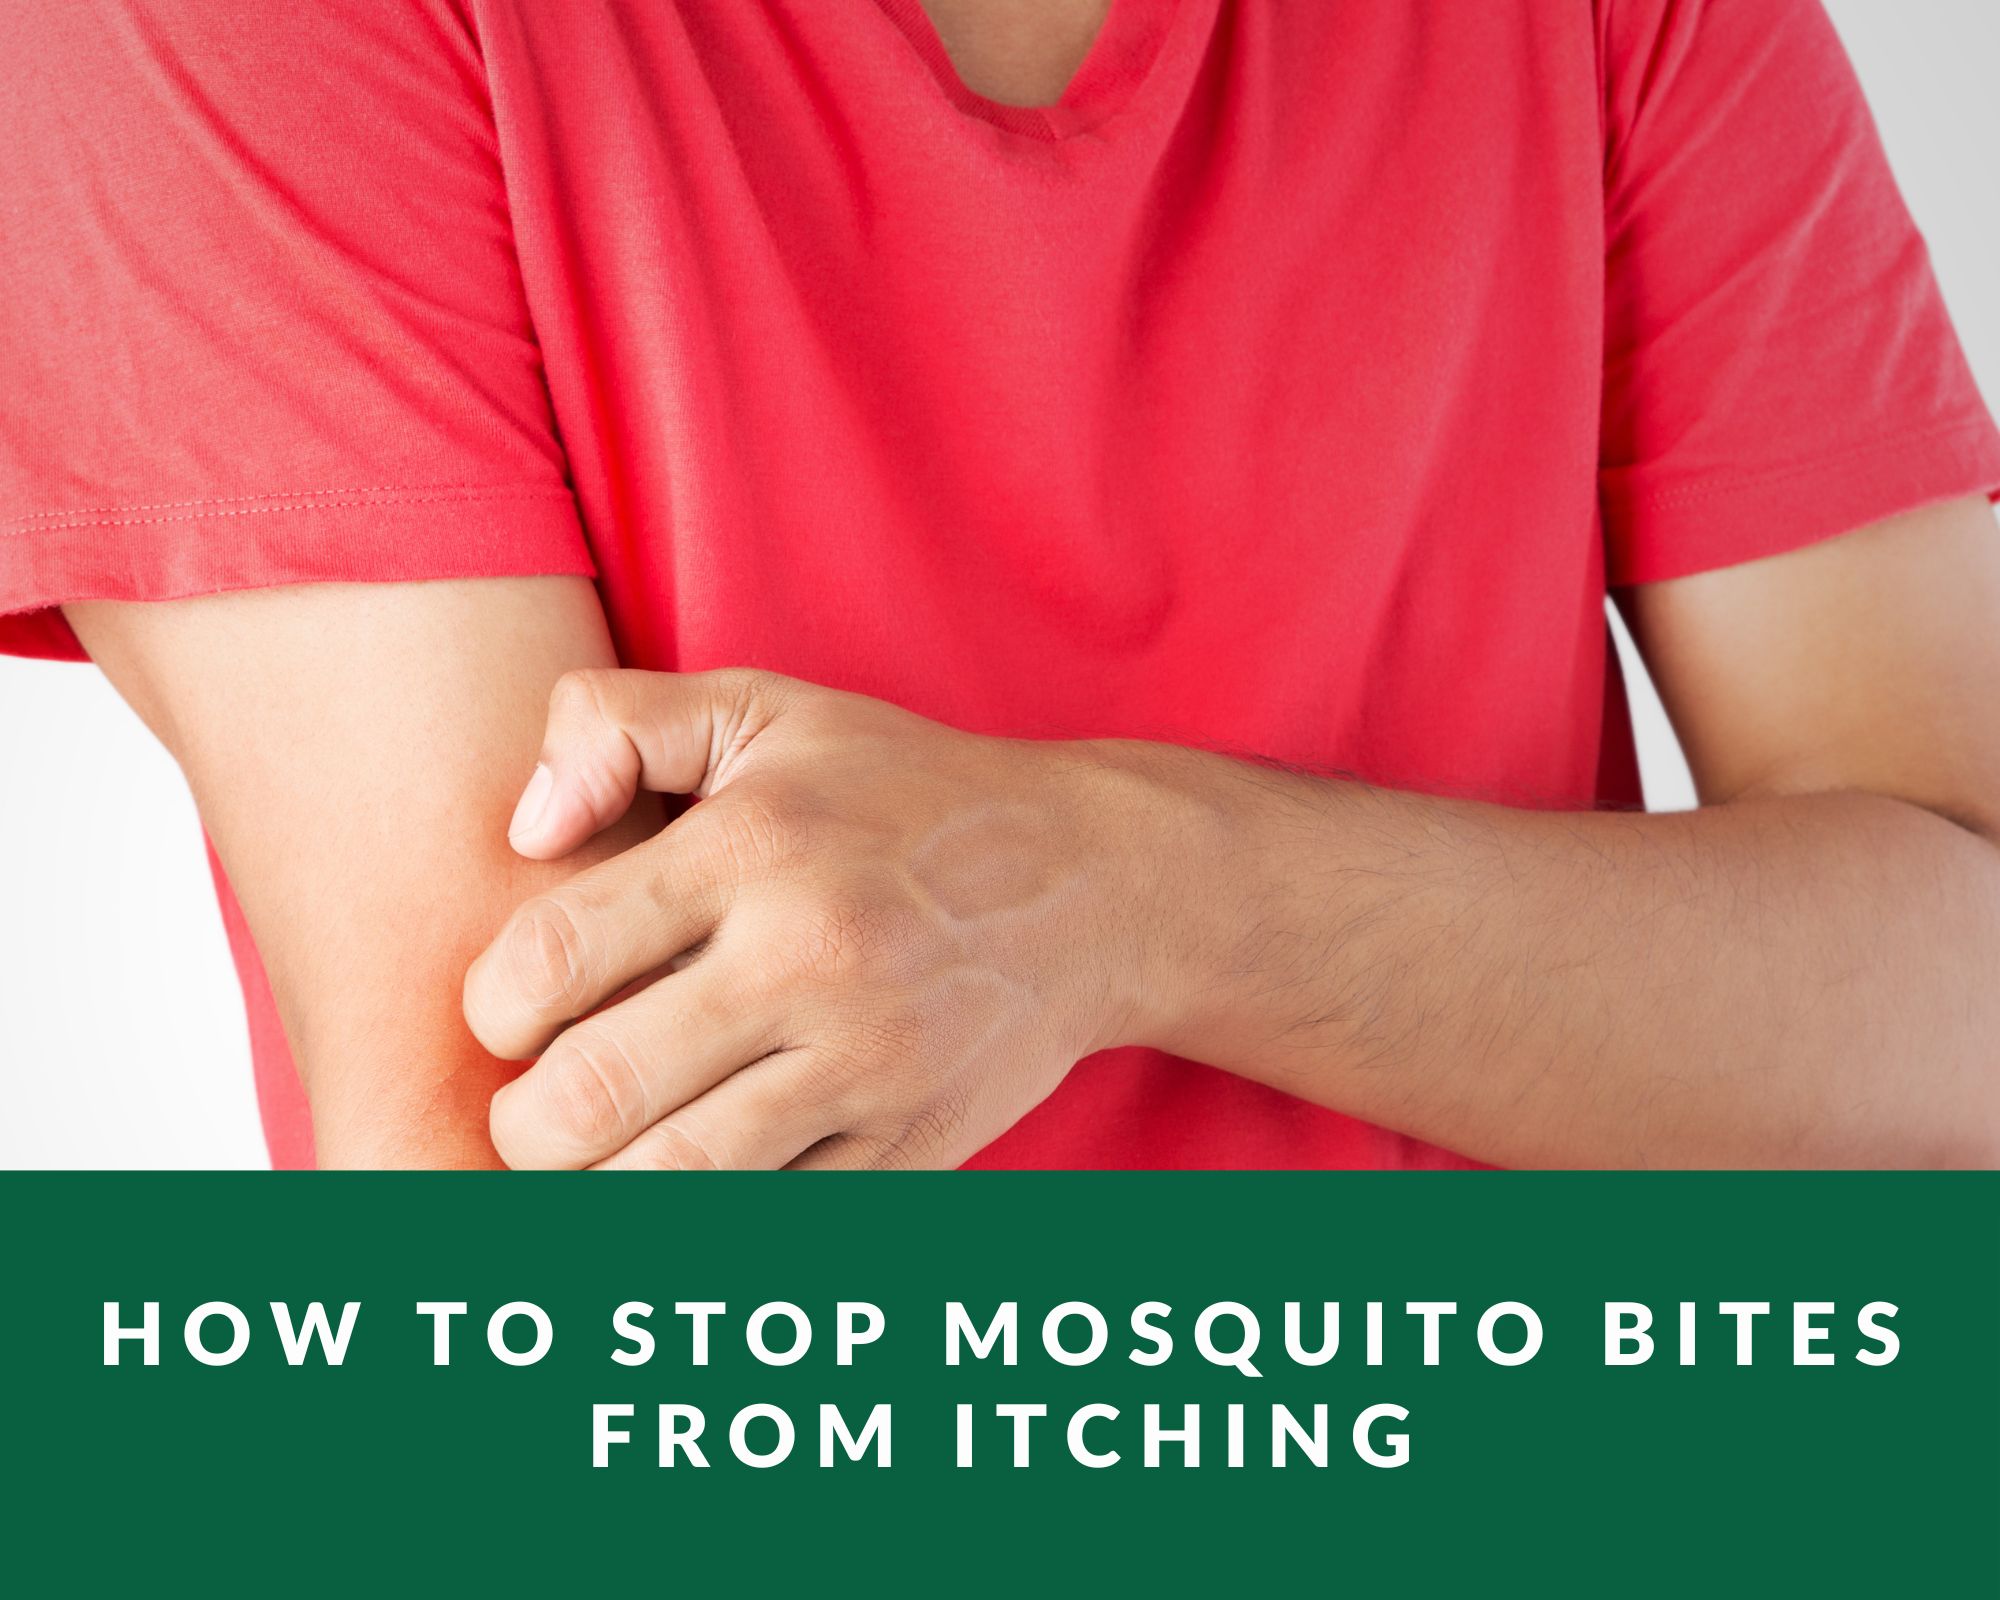 How to Stop Mosquito Bites from Itching